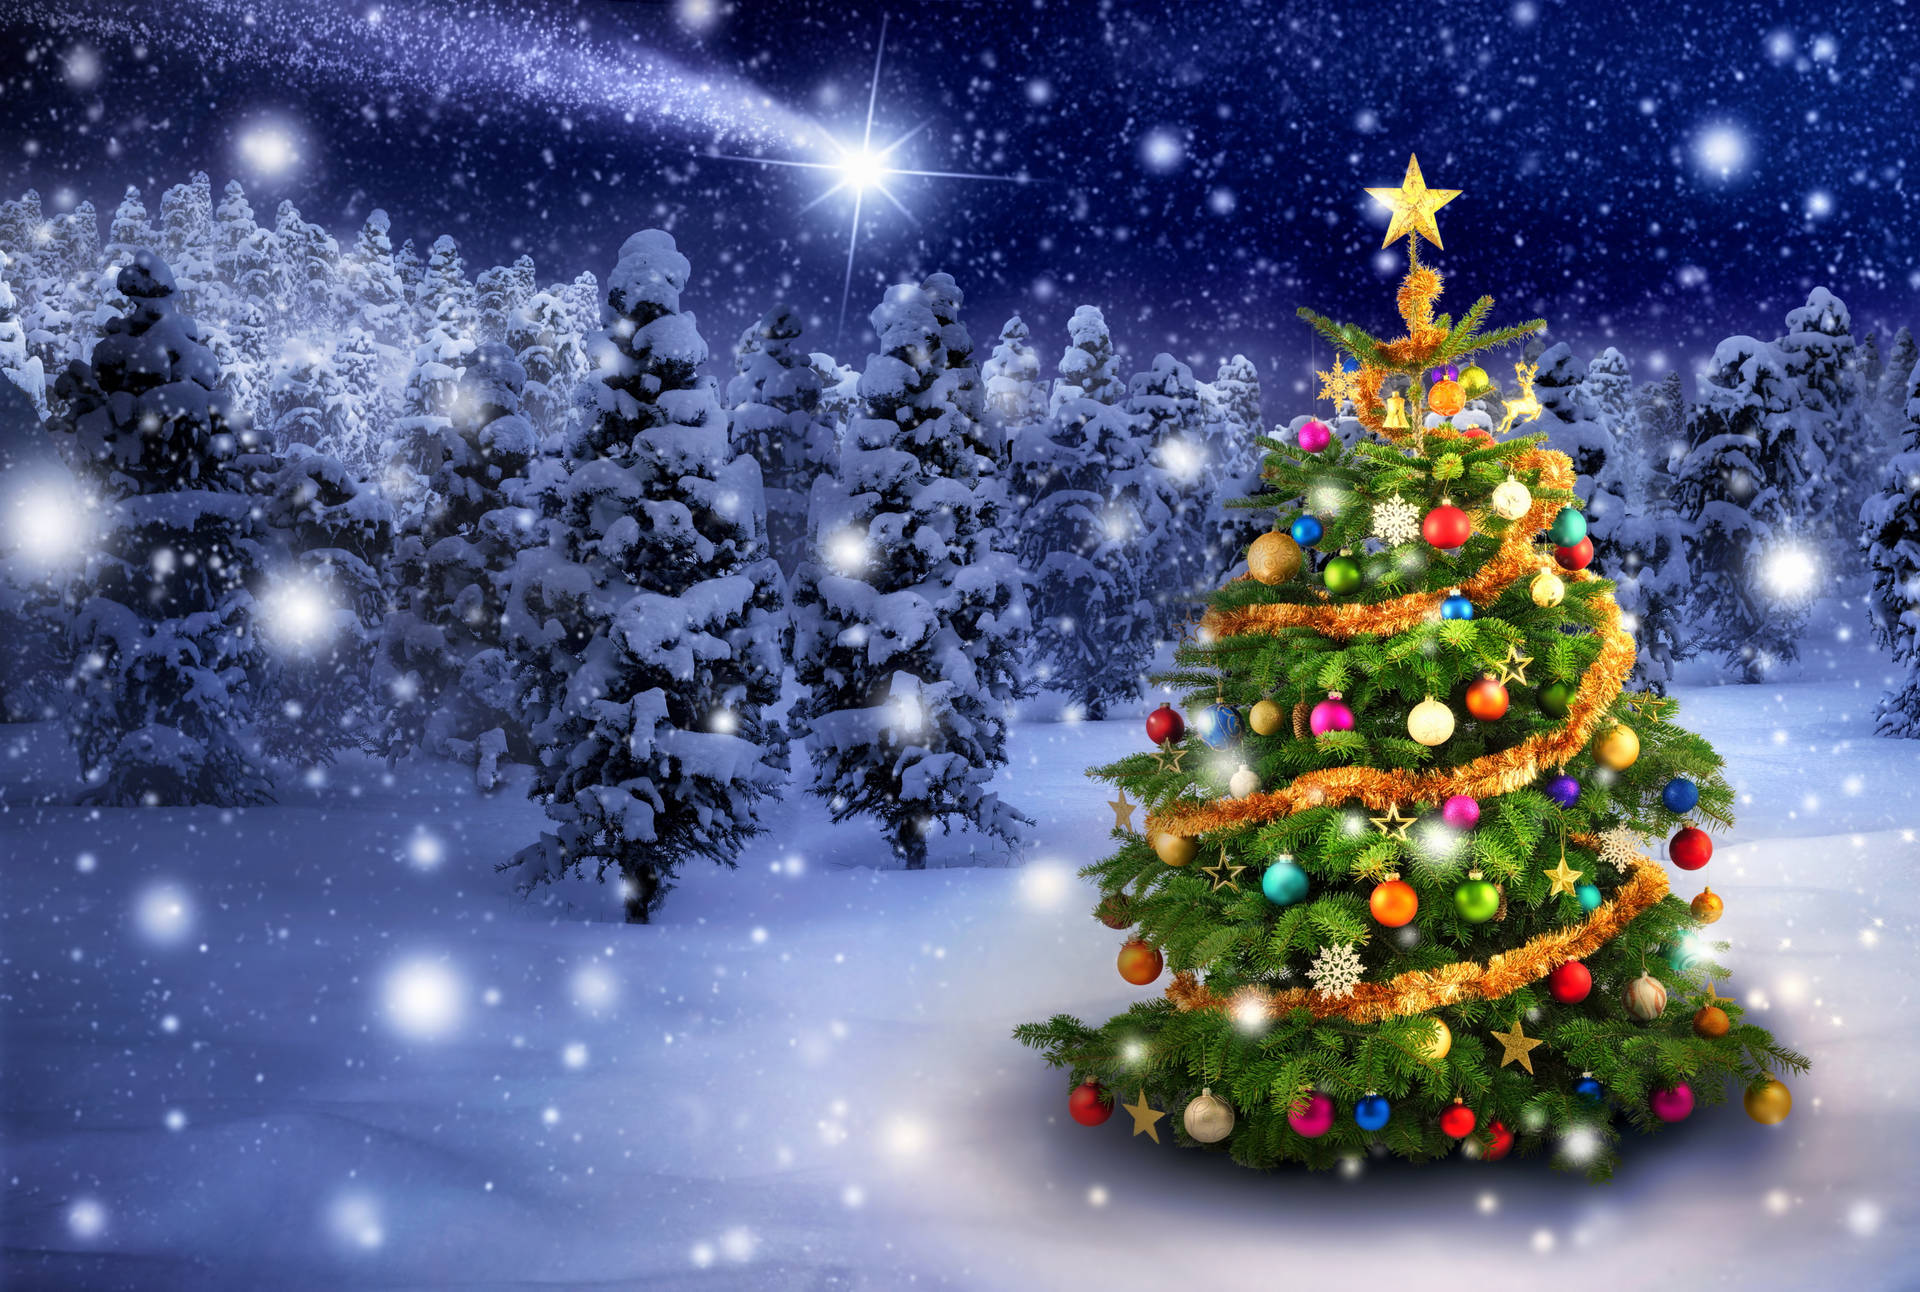 Winter Christmas Tree And Shooting Star Background